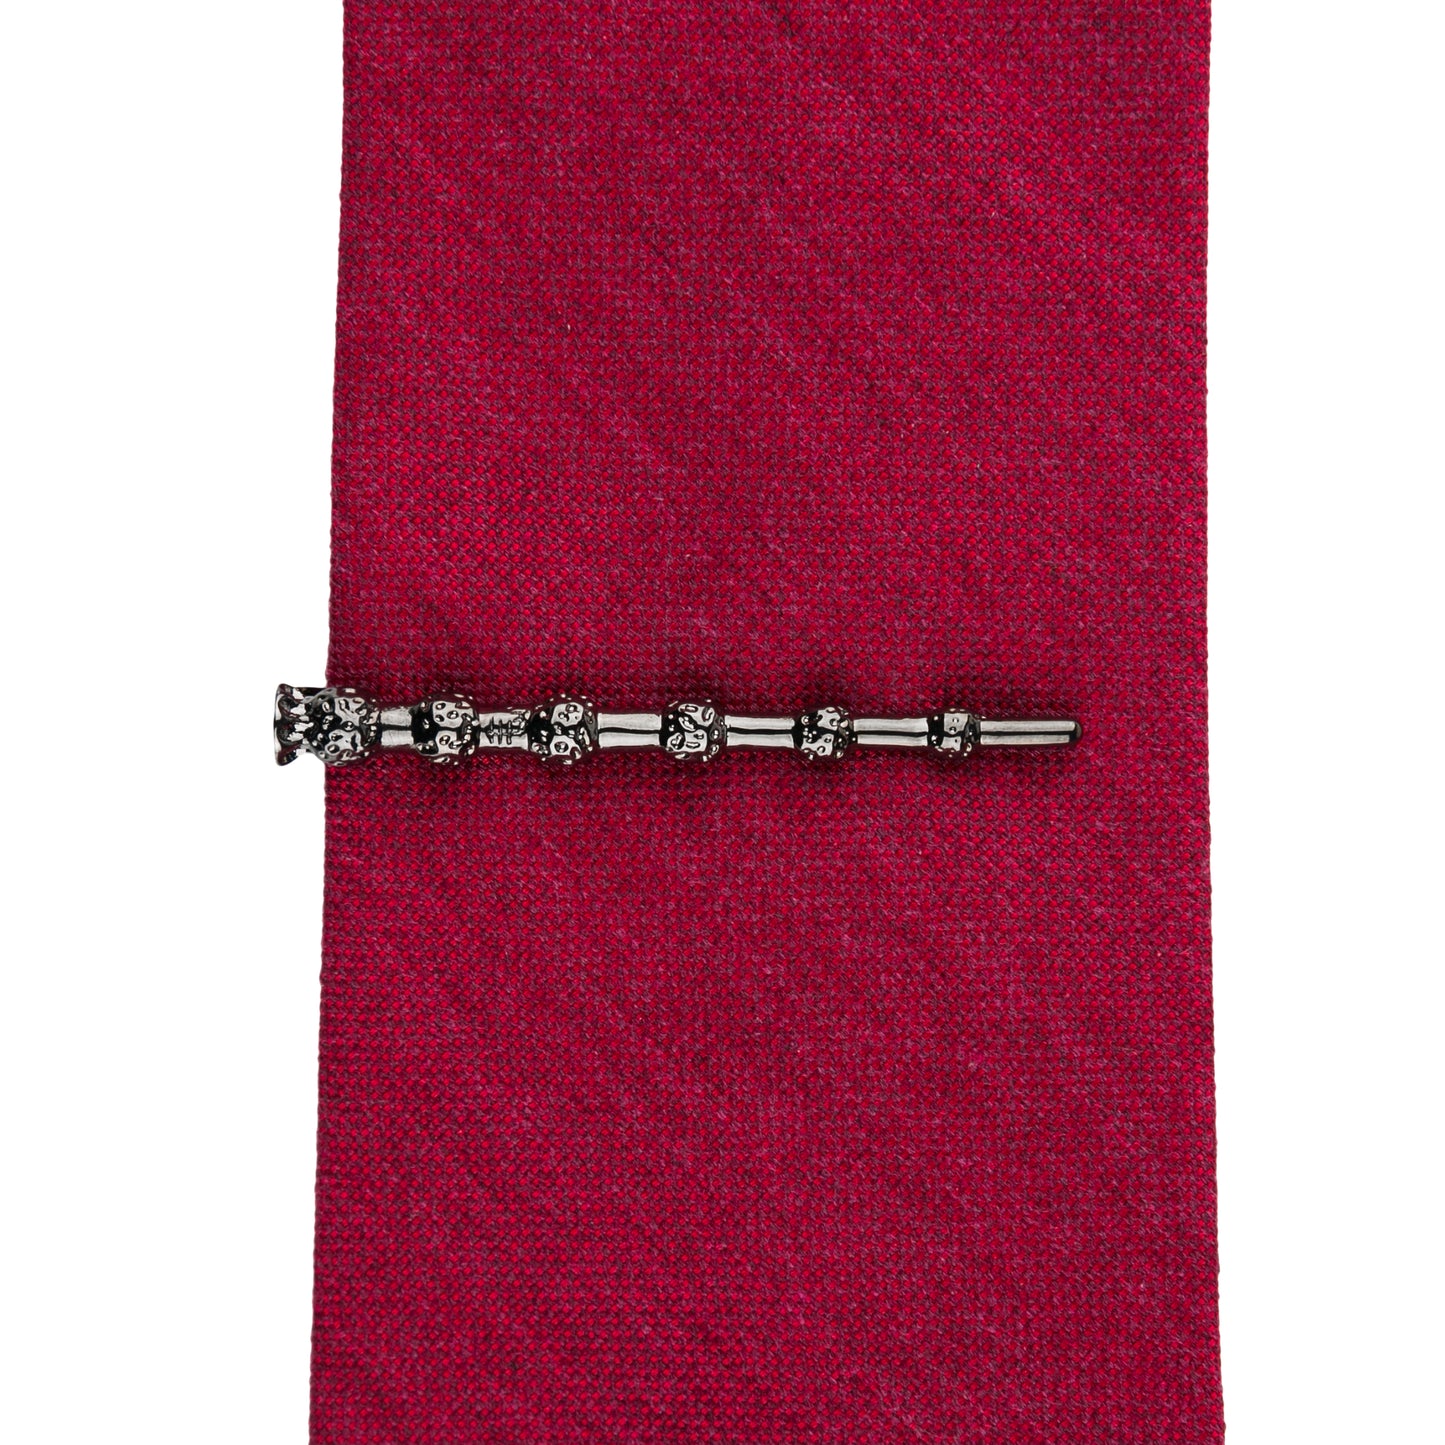 The Wand Of The Wizard (Tie Clip)